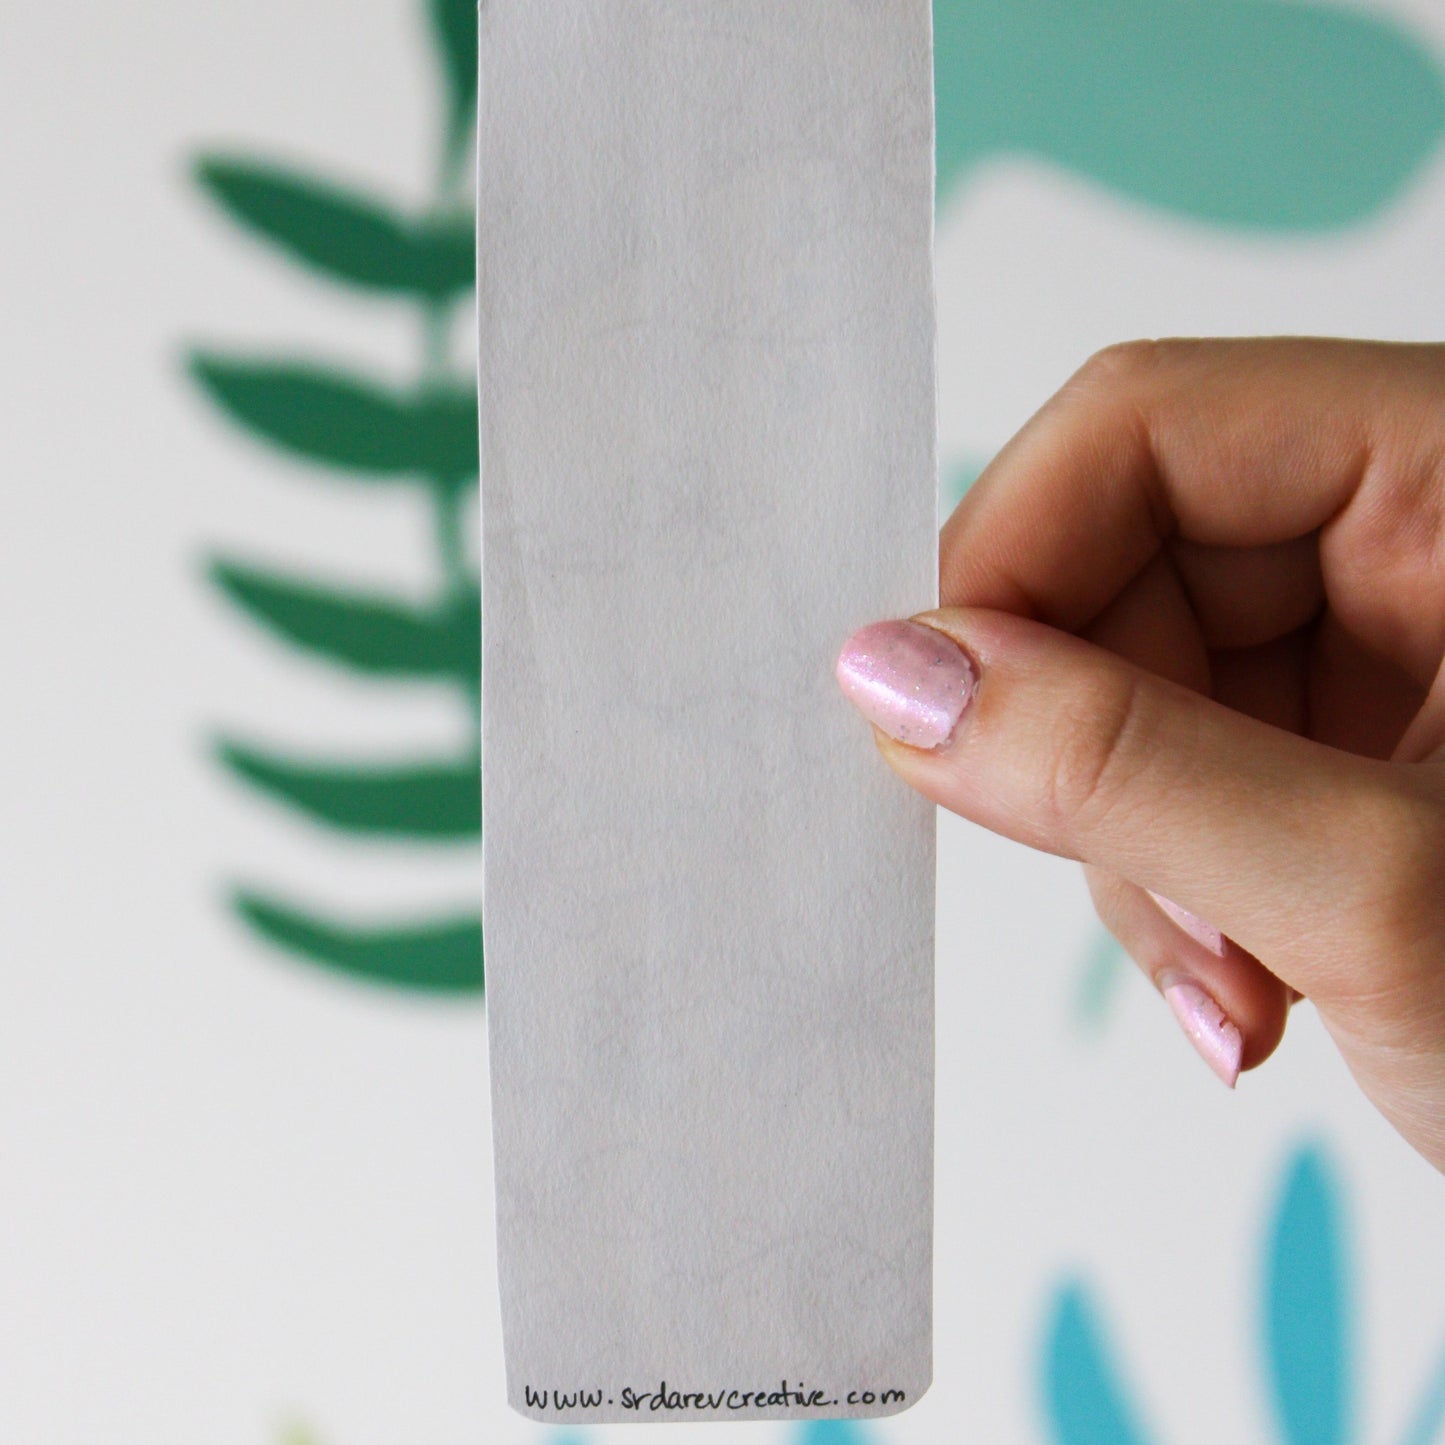 A blurred leaf background. In front is a hand holding a white bookmark and on the bottom is "www.srdarevcreative.com".